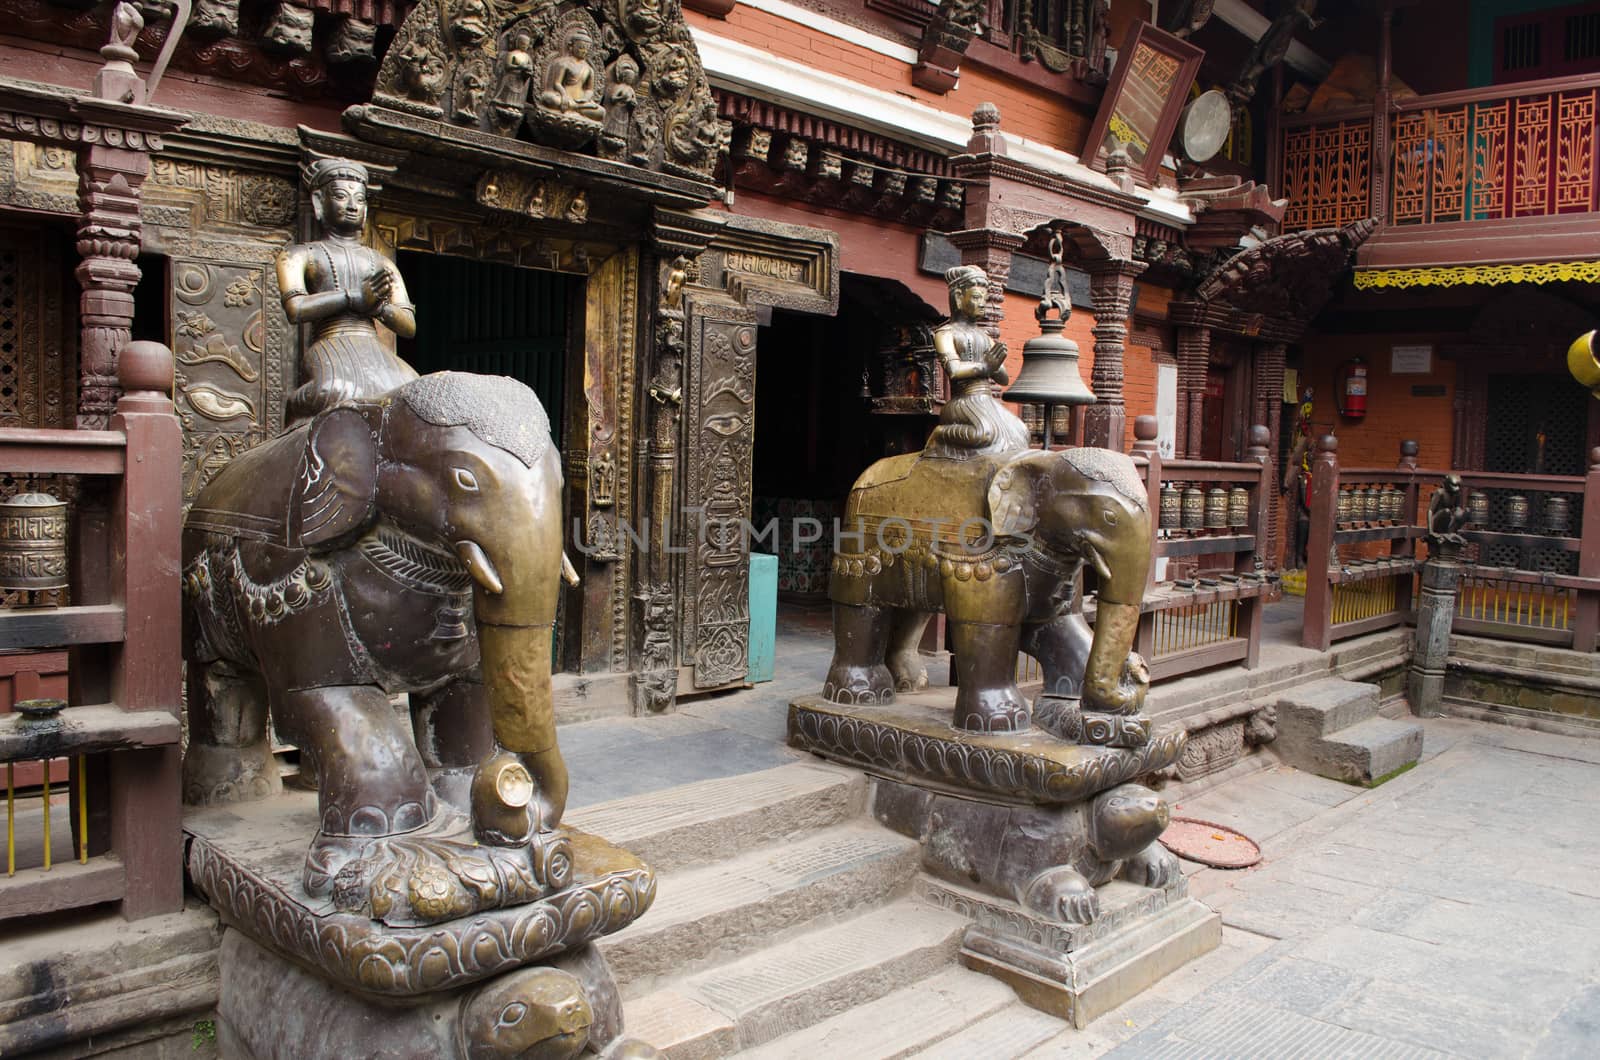 NEPAL-Patan Durbar Square one of the main sights of the Kathmand by visanuwit